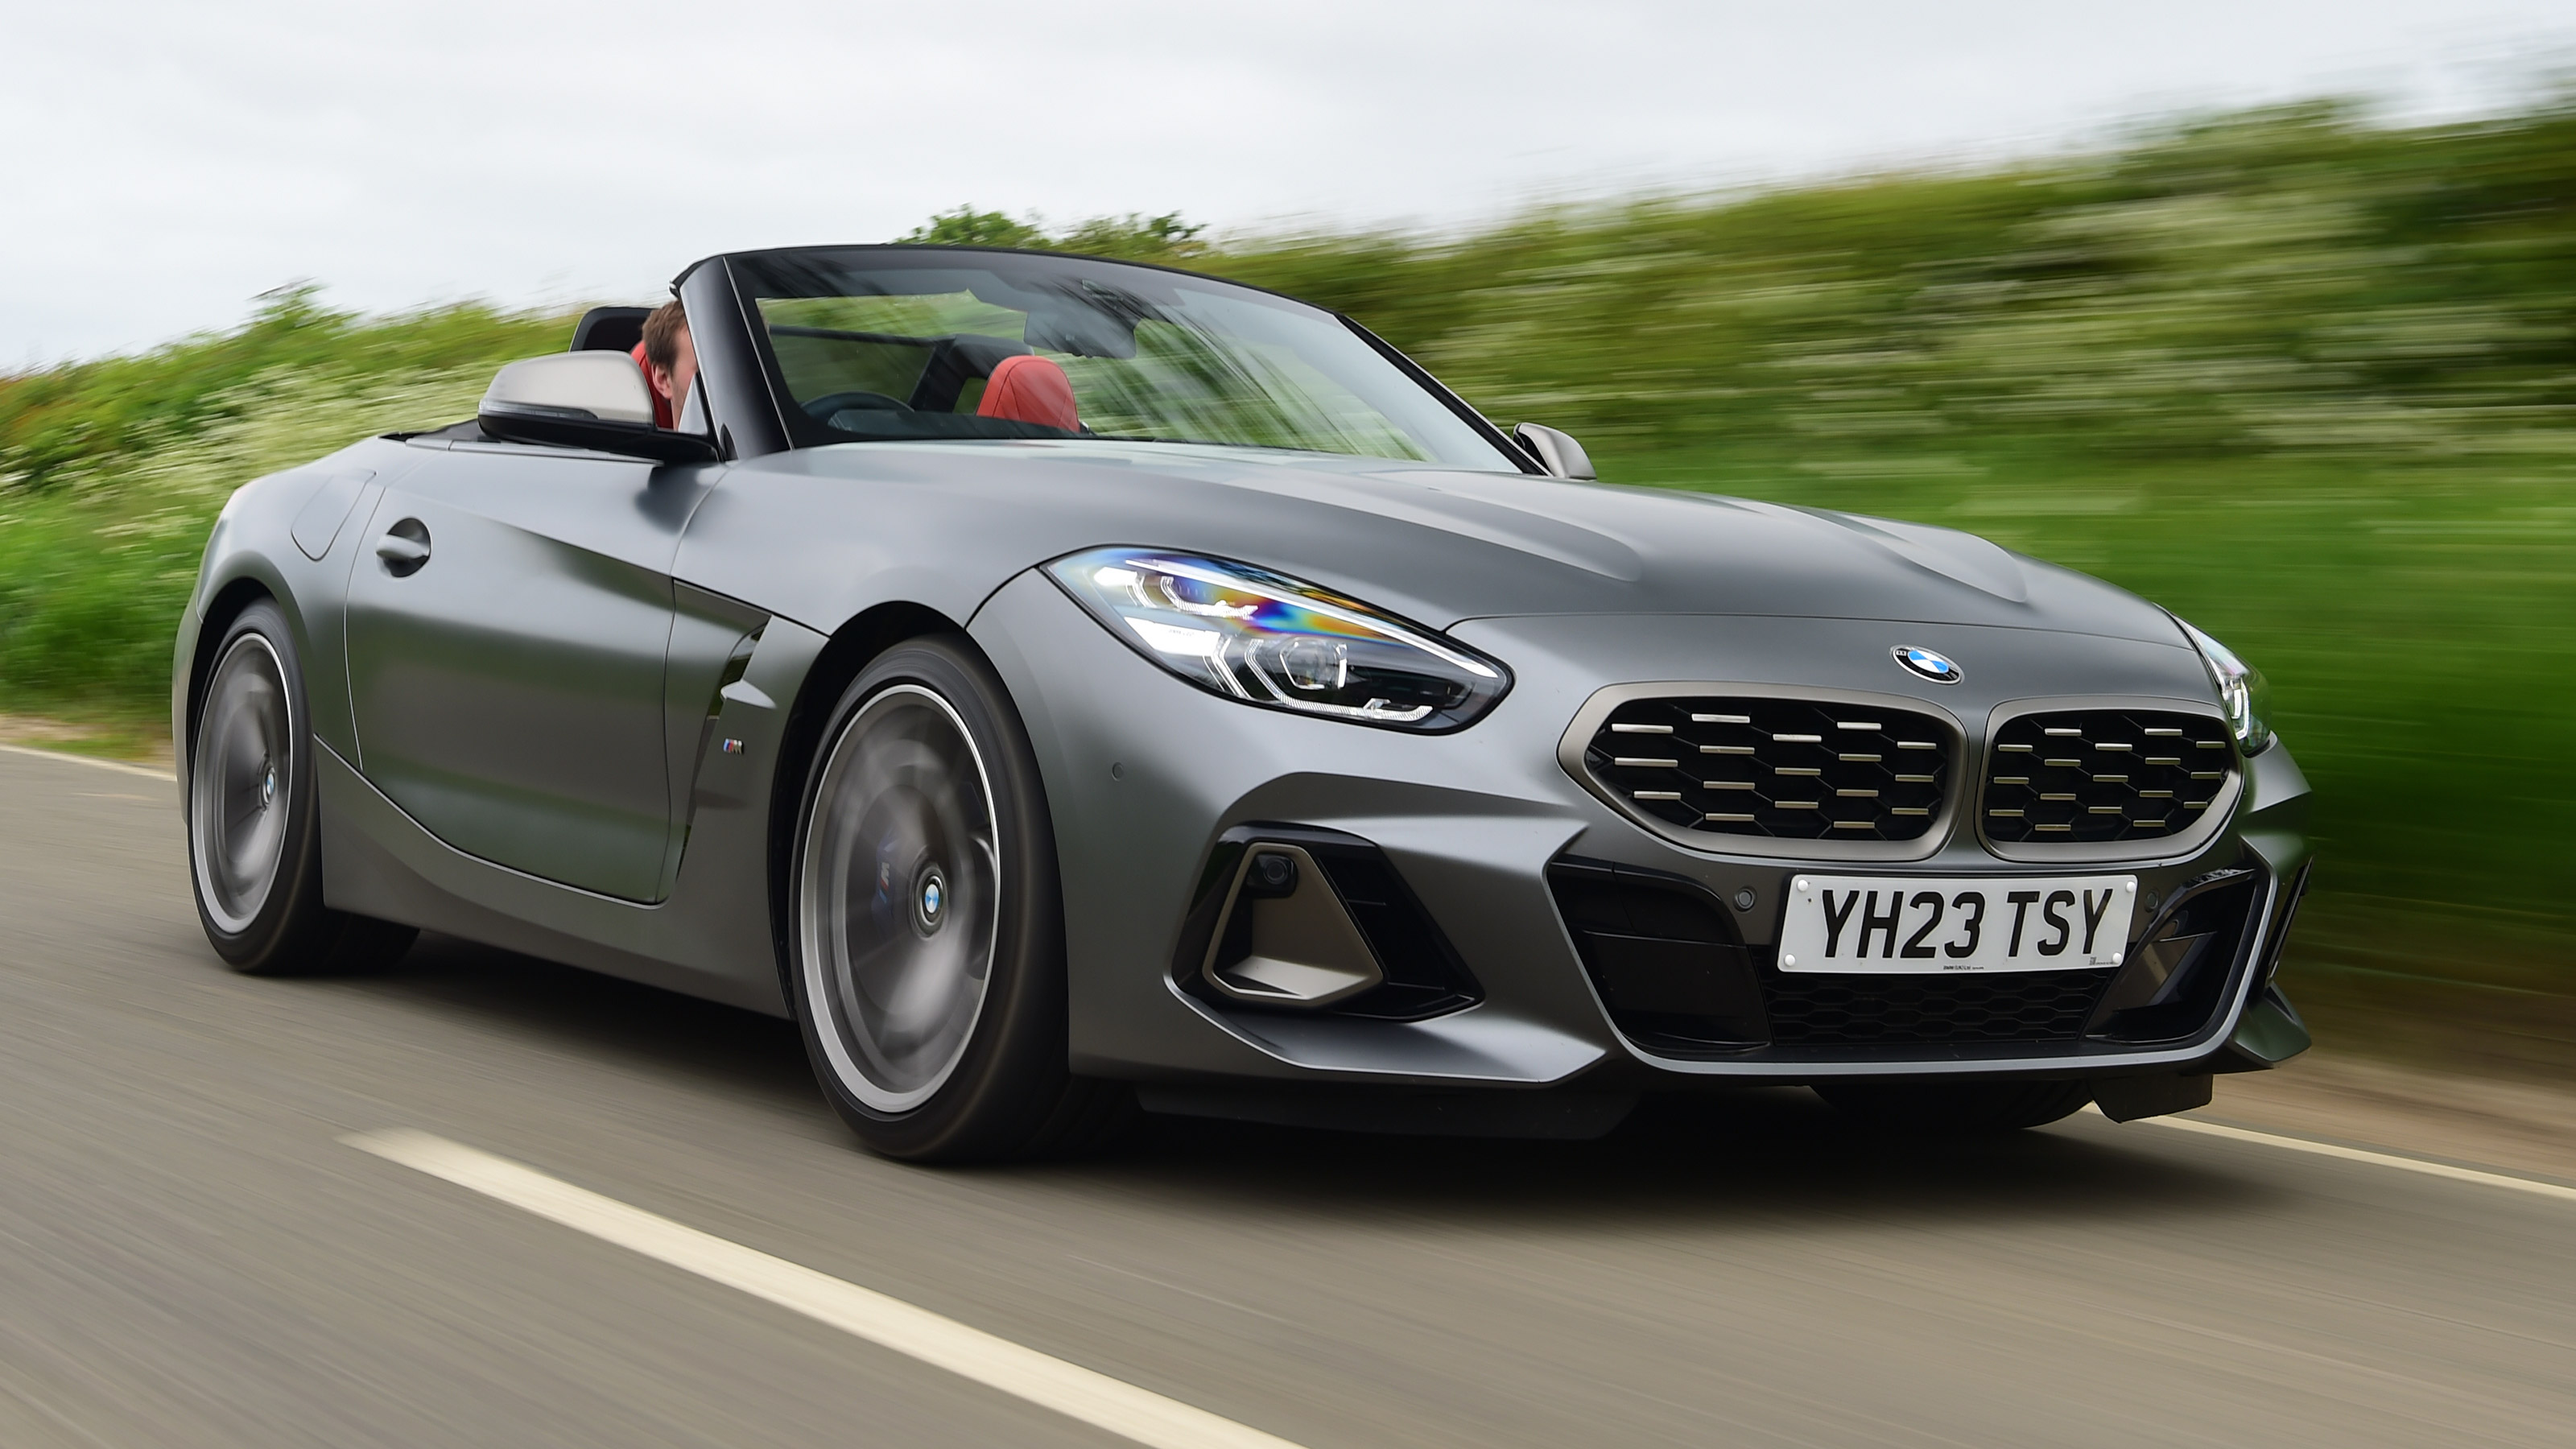 BMW Z4 Review: Top Gone - Motoring World